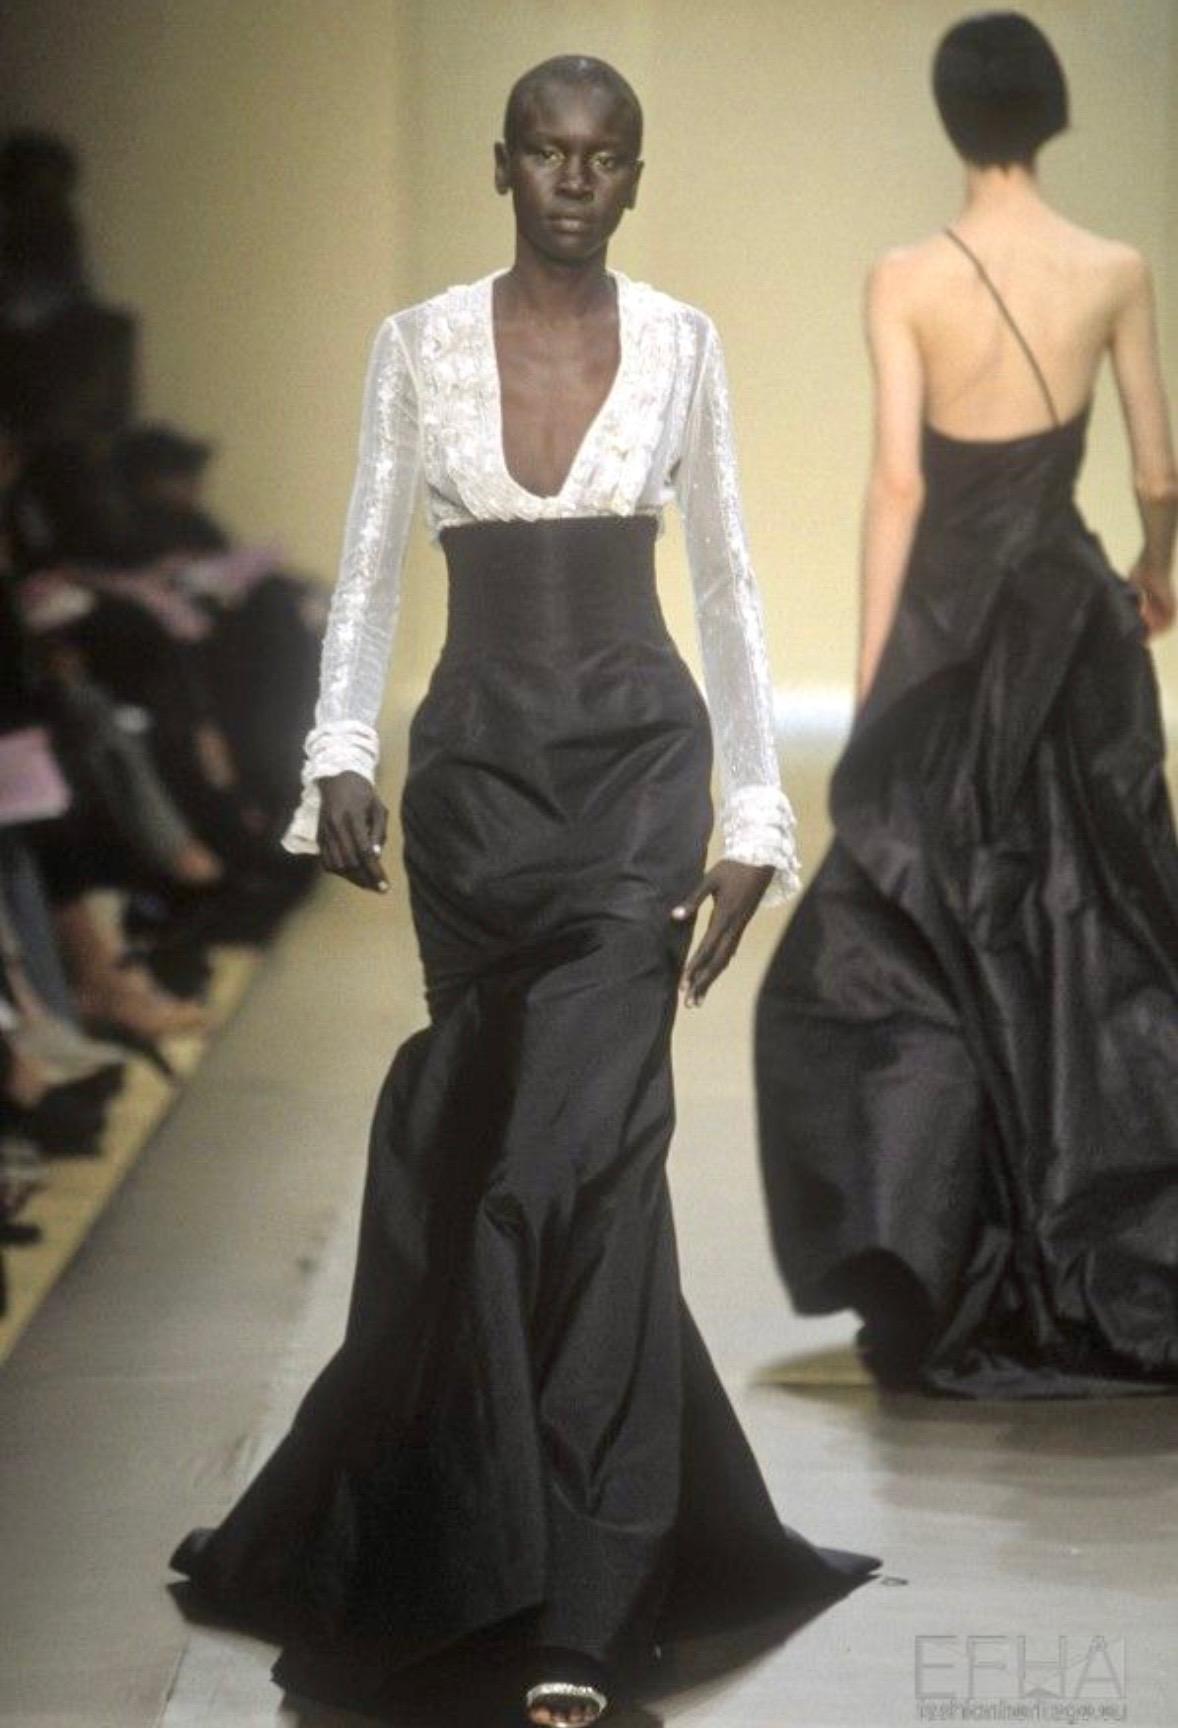 TheRealList presents: an incredible black high-waisted Pierre Balmain Haute Couture full-length skirt, designed by Oscar de la Renta. From the Fall/Winter 2000 collection, this truly fabulous skirt debuted on the season’s runway modeled by Alek Wek.